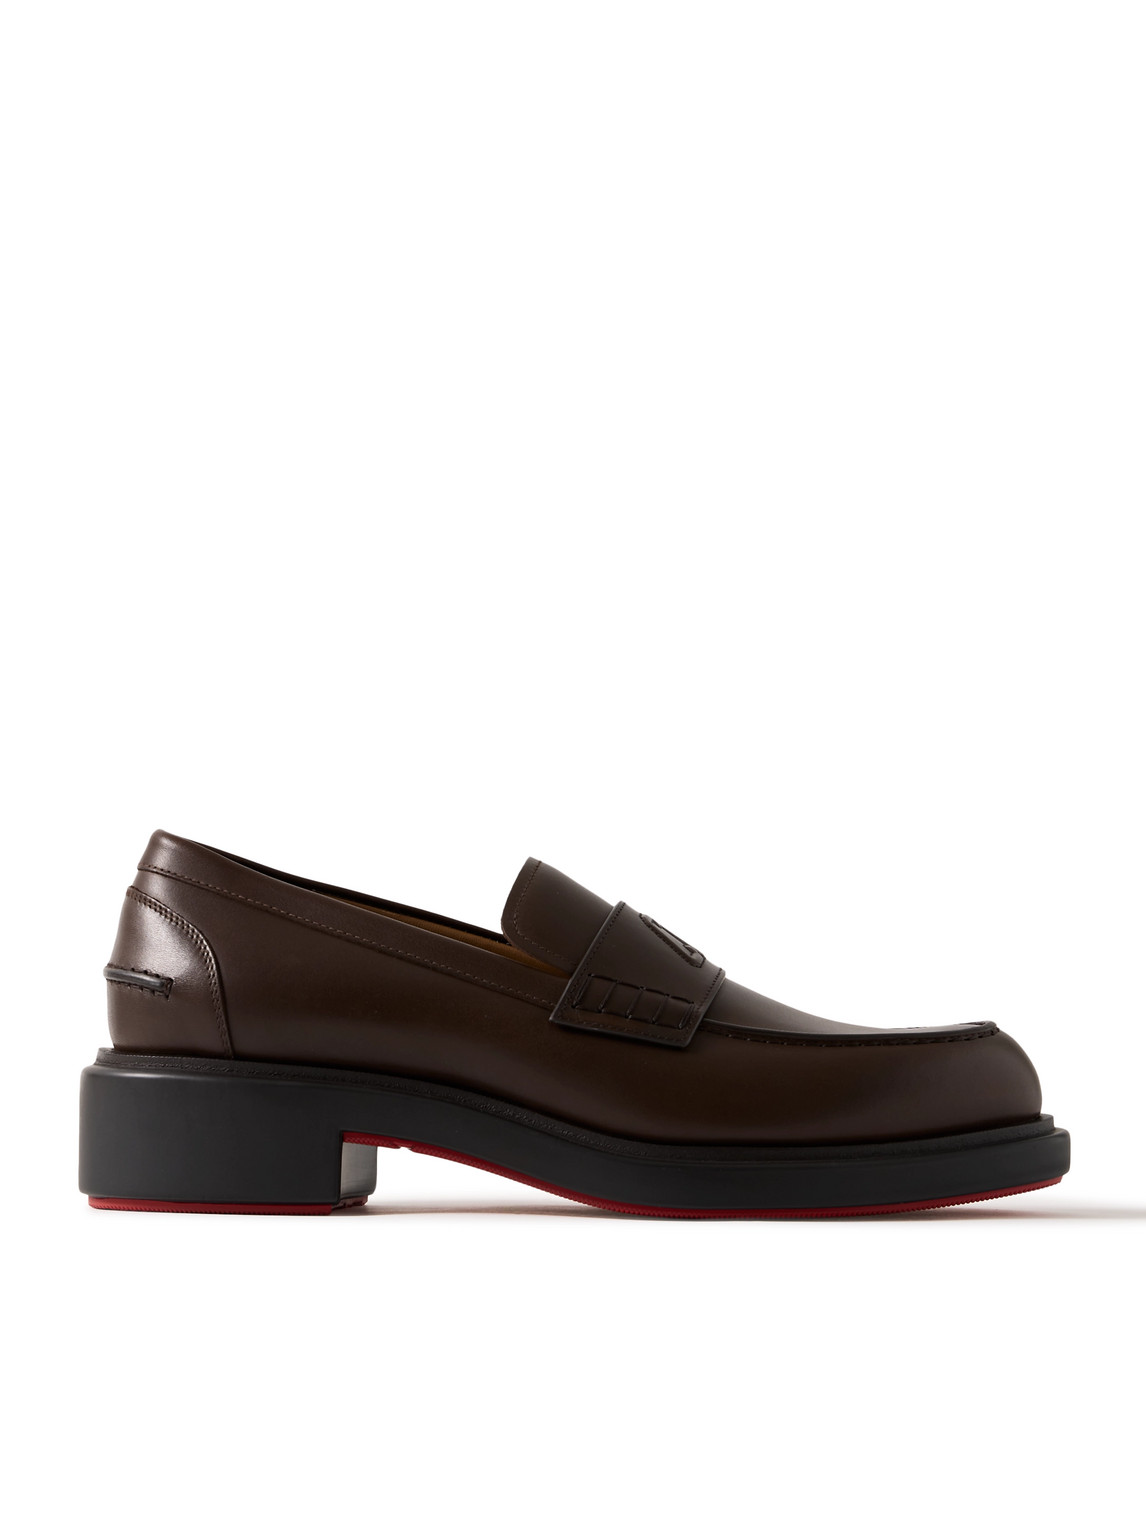 Christian Louboutin Urbino Moc Leather Penny Loafers In Brown